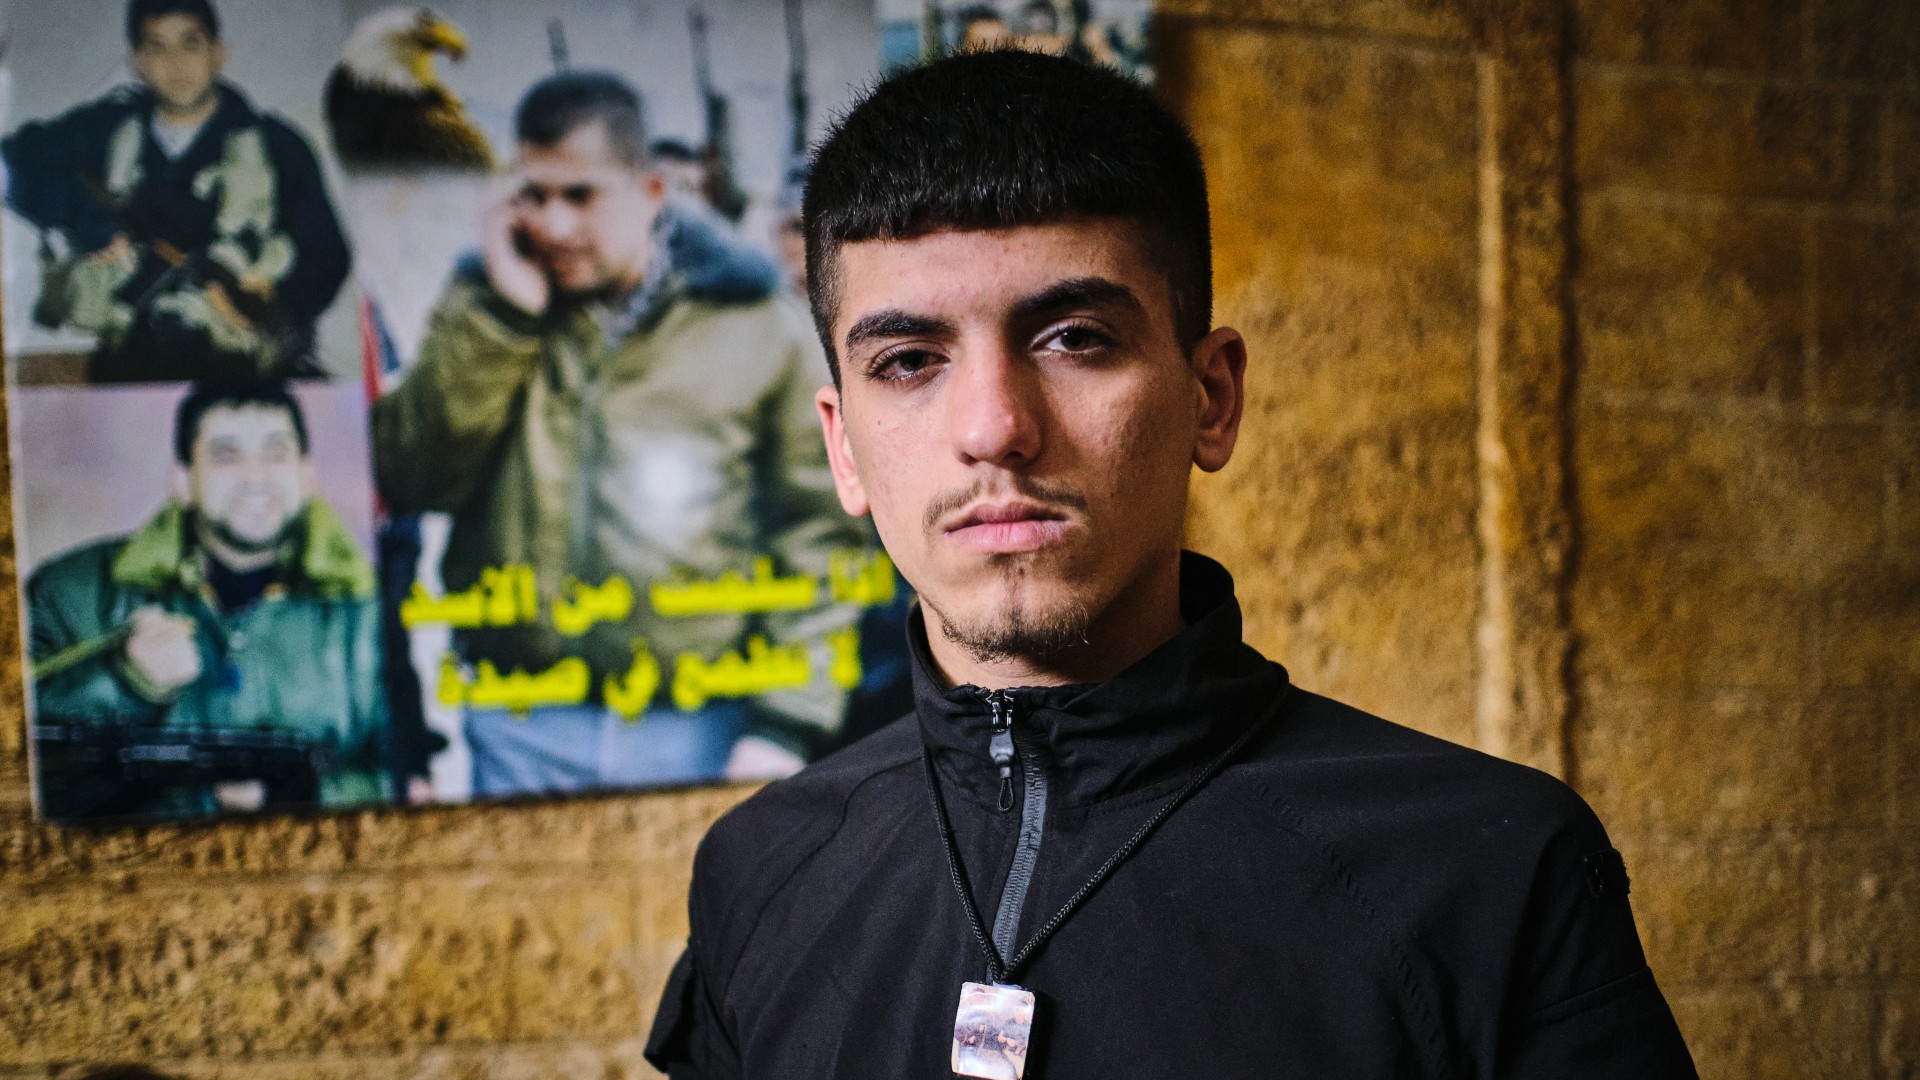 Mohammed Sawalmeh, 17, says he was forbidden from praying while in Israeli prison (MEE/Angelo Calianno)